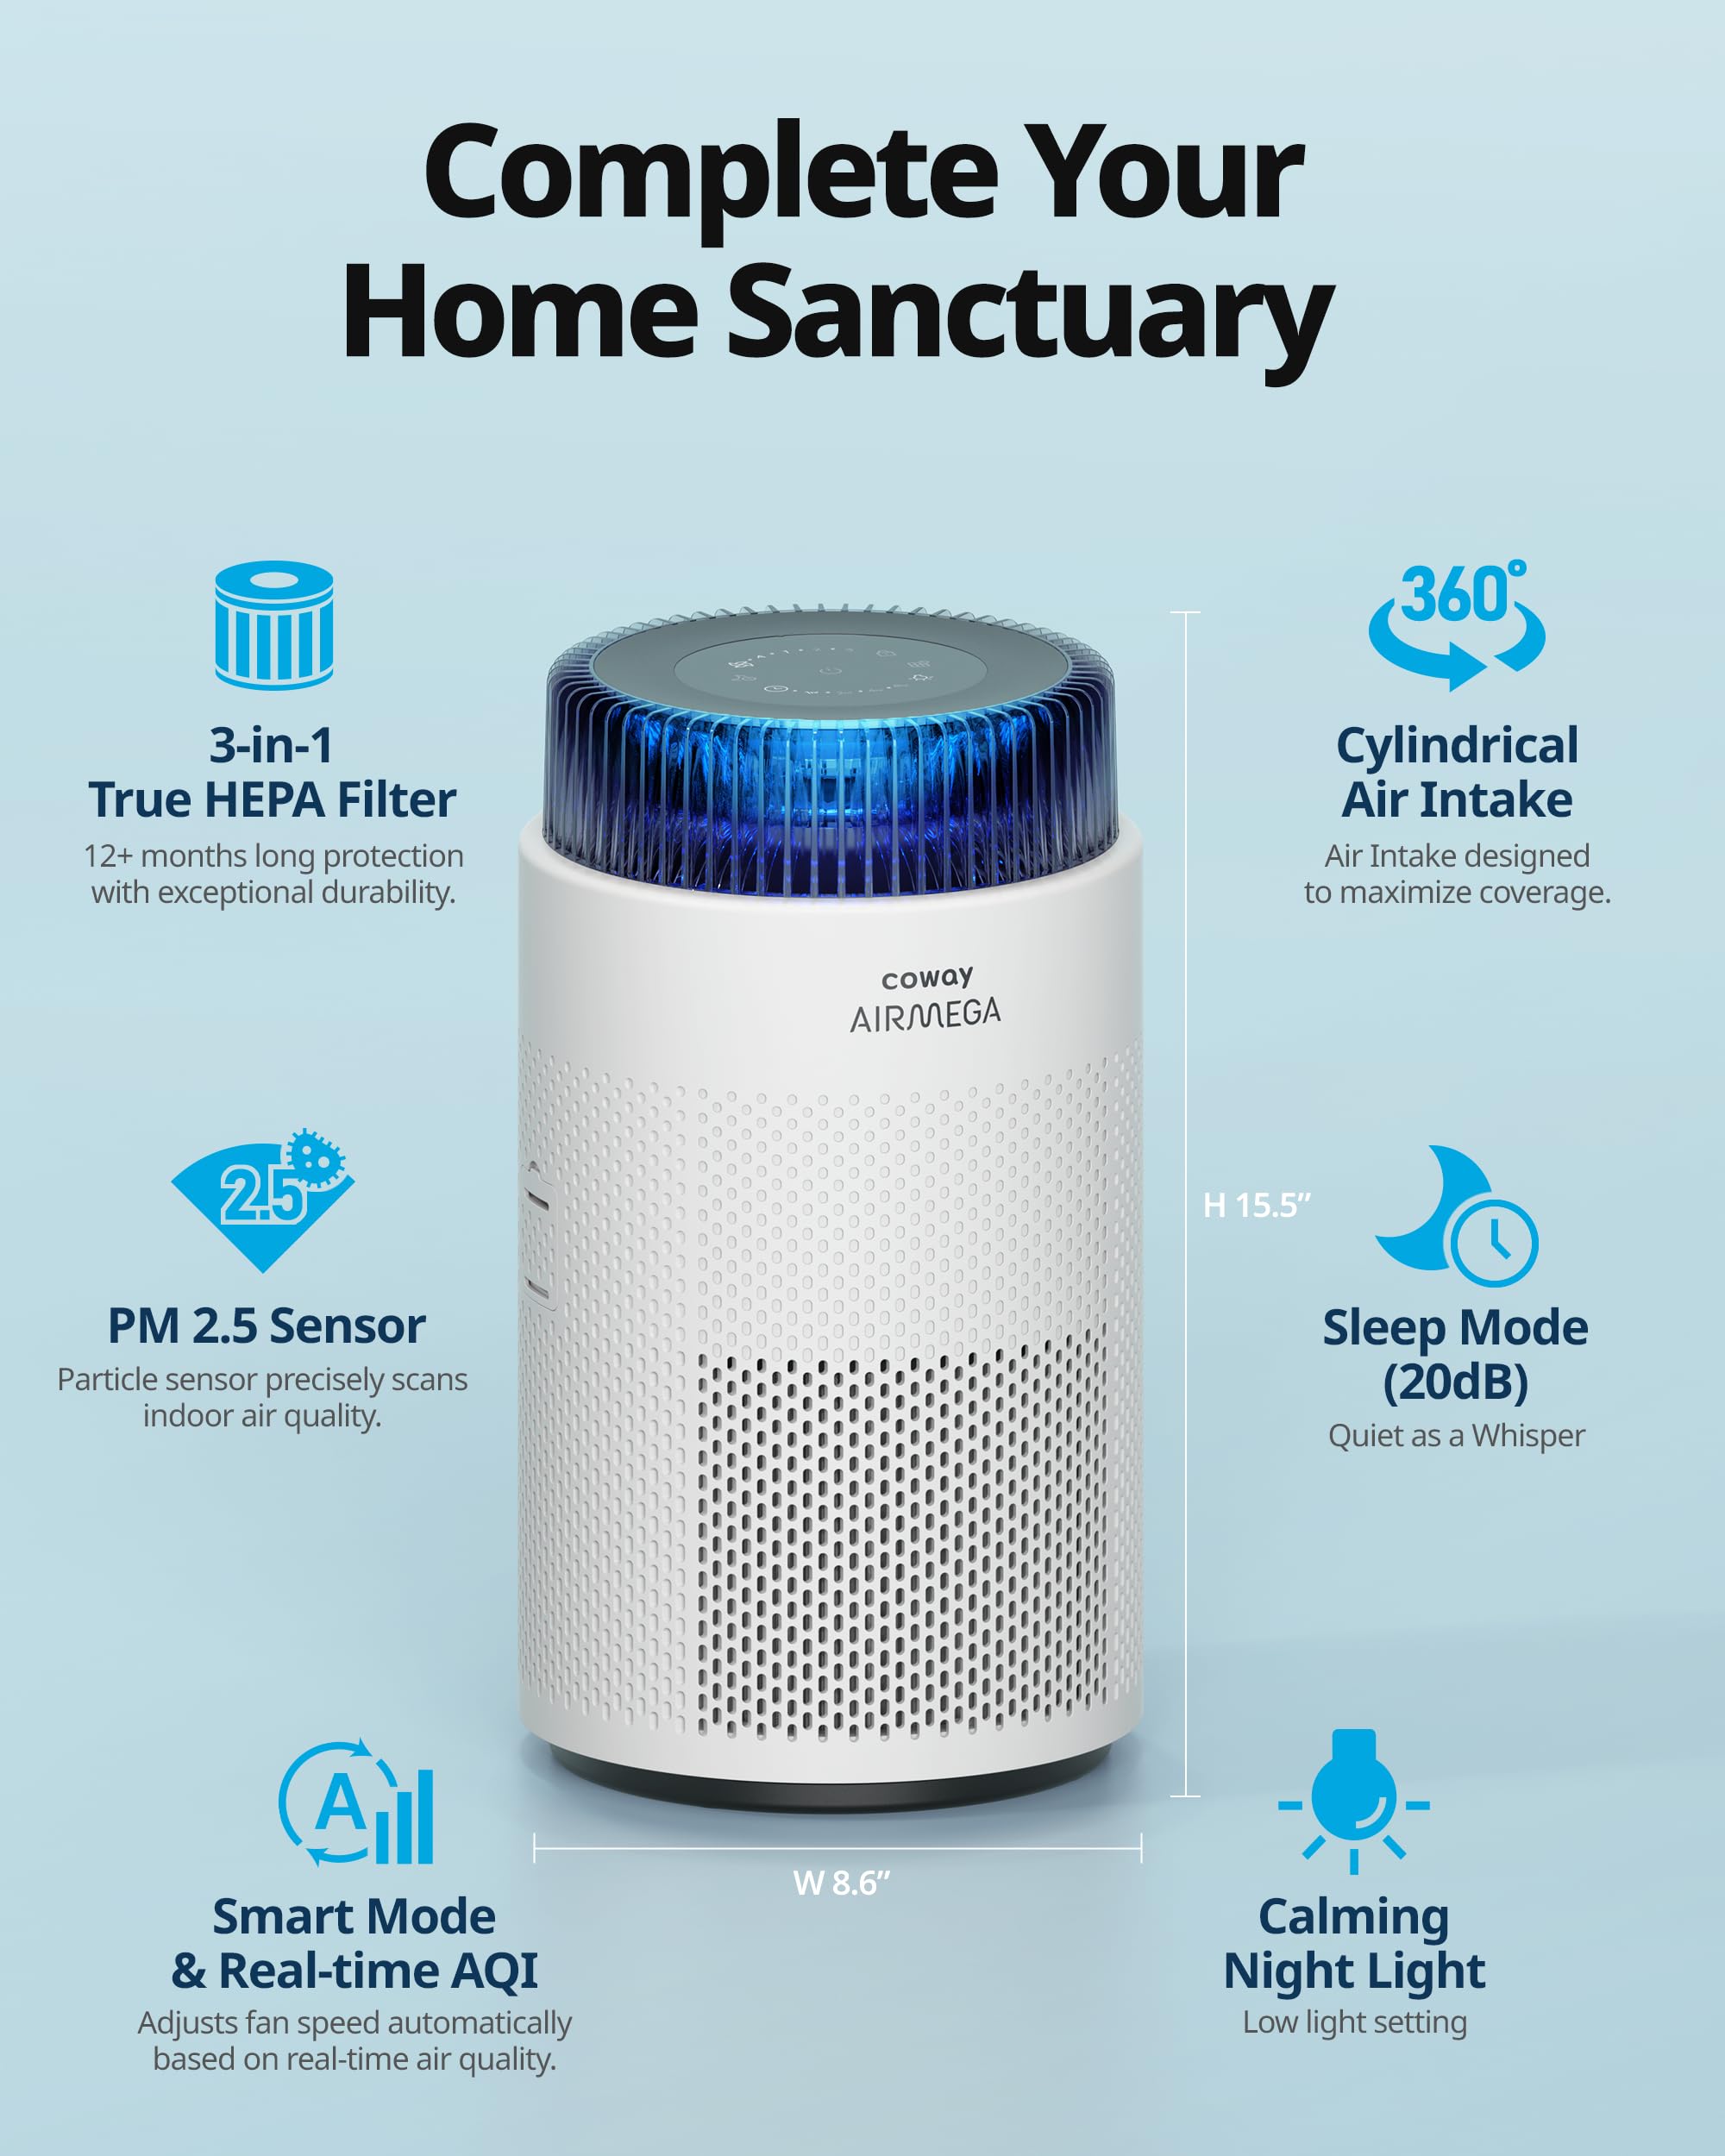 Coway Airmega 100 True HEPA Air Purifier with Air Quality Monitoring, Auto Mode, Sleep Mode, Timer, Filter Indicator, Night Light